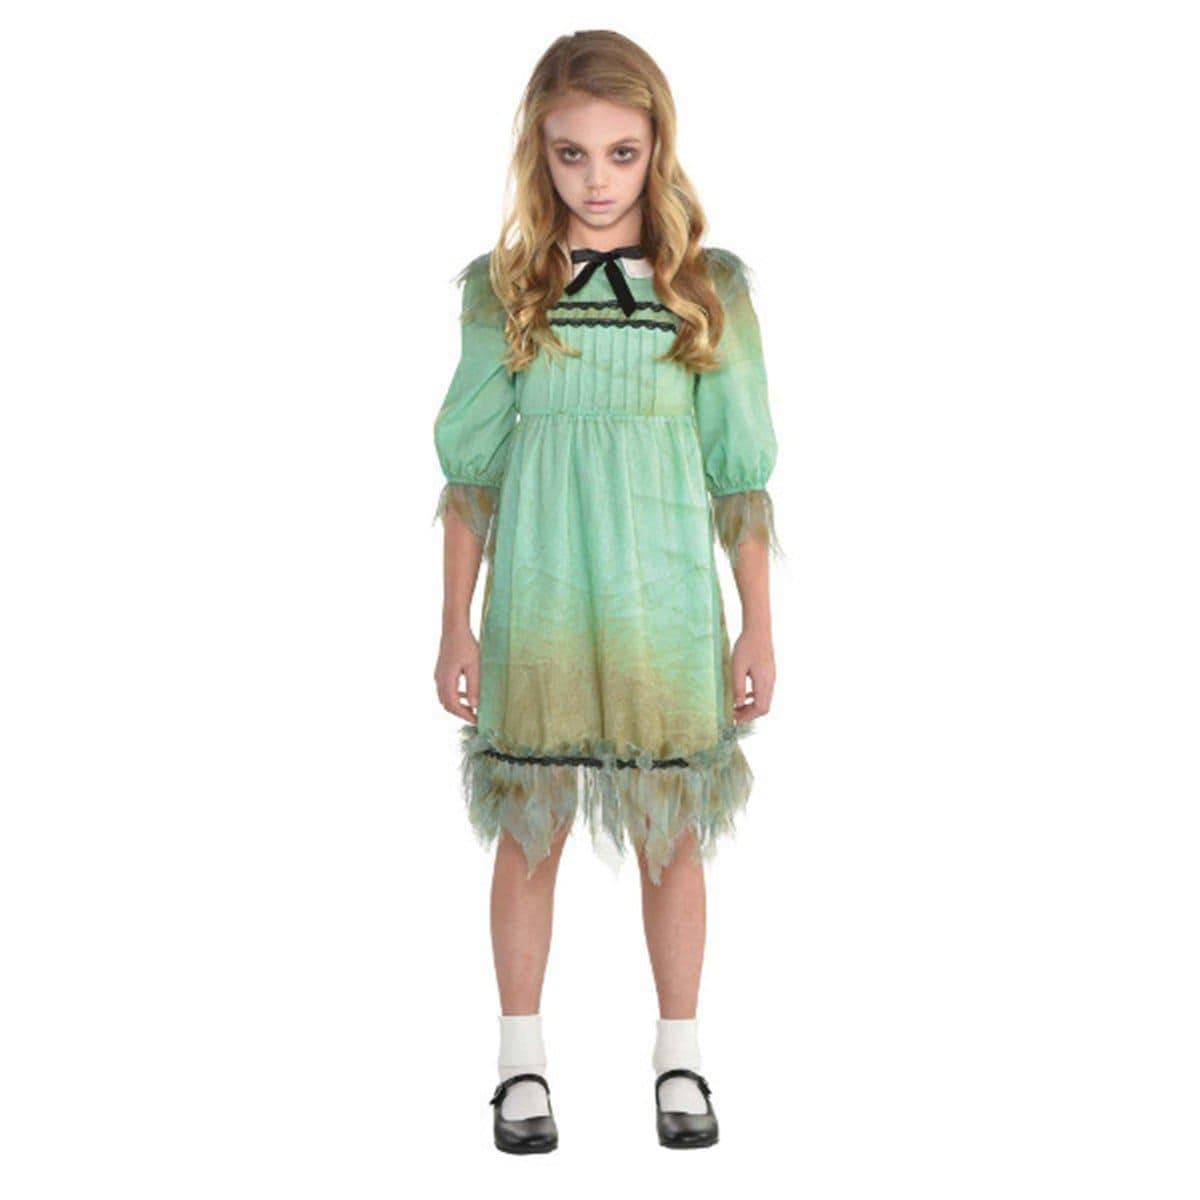 Buy Costumes Creepy Girl Costume for Kids sold at Party Expert